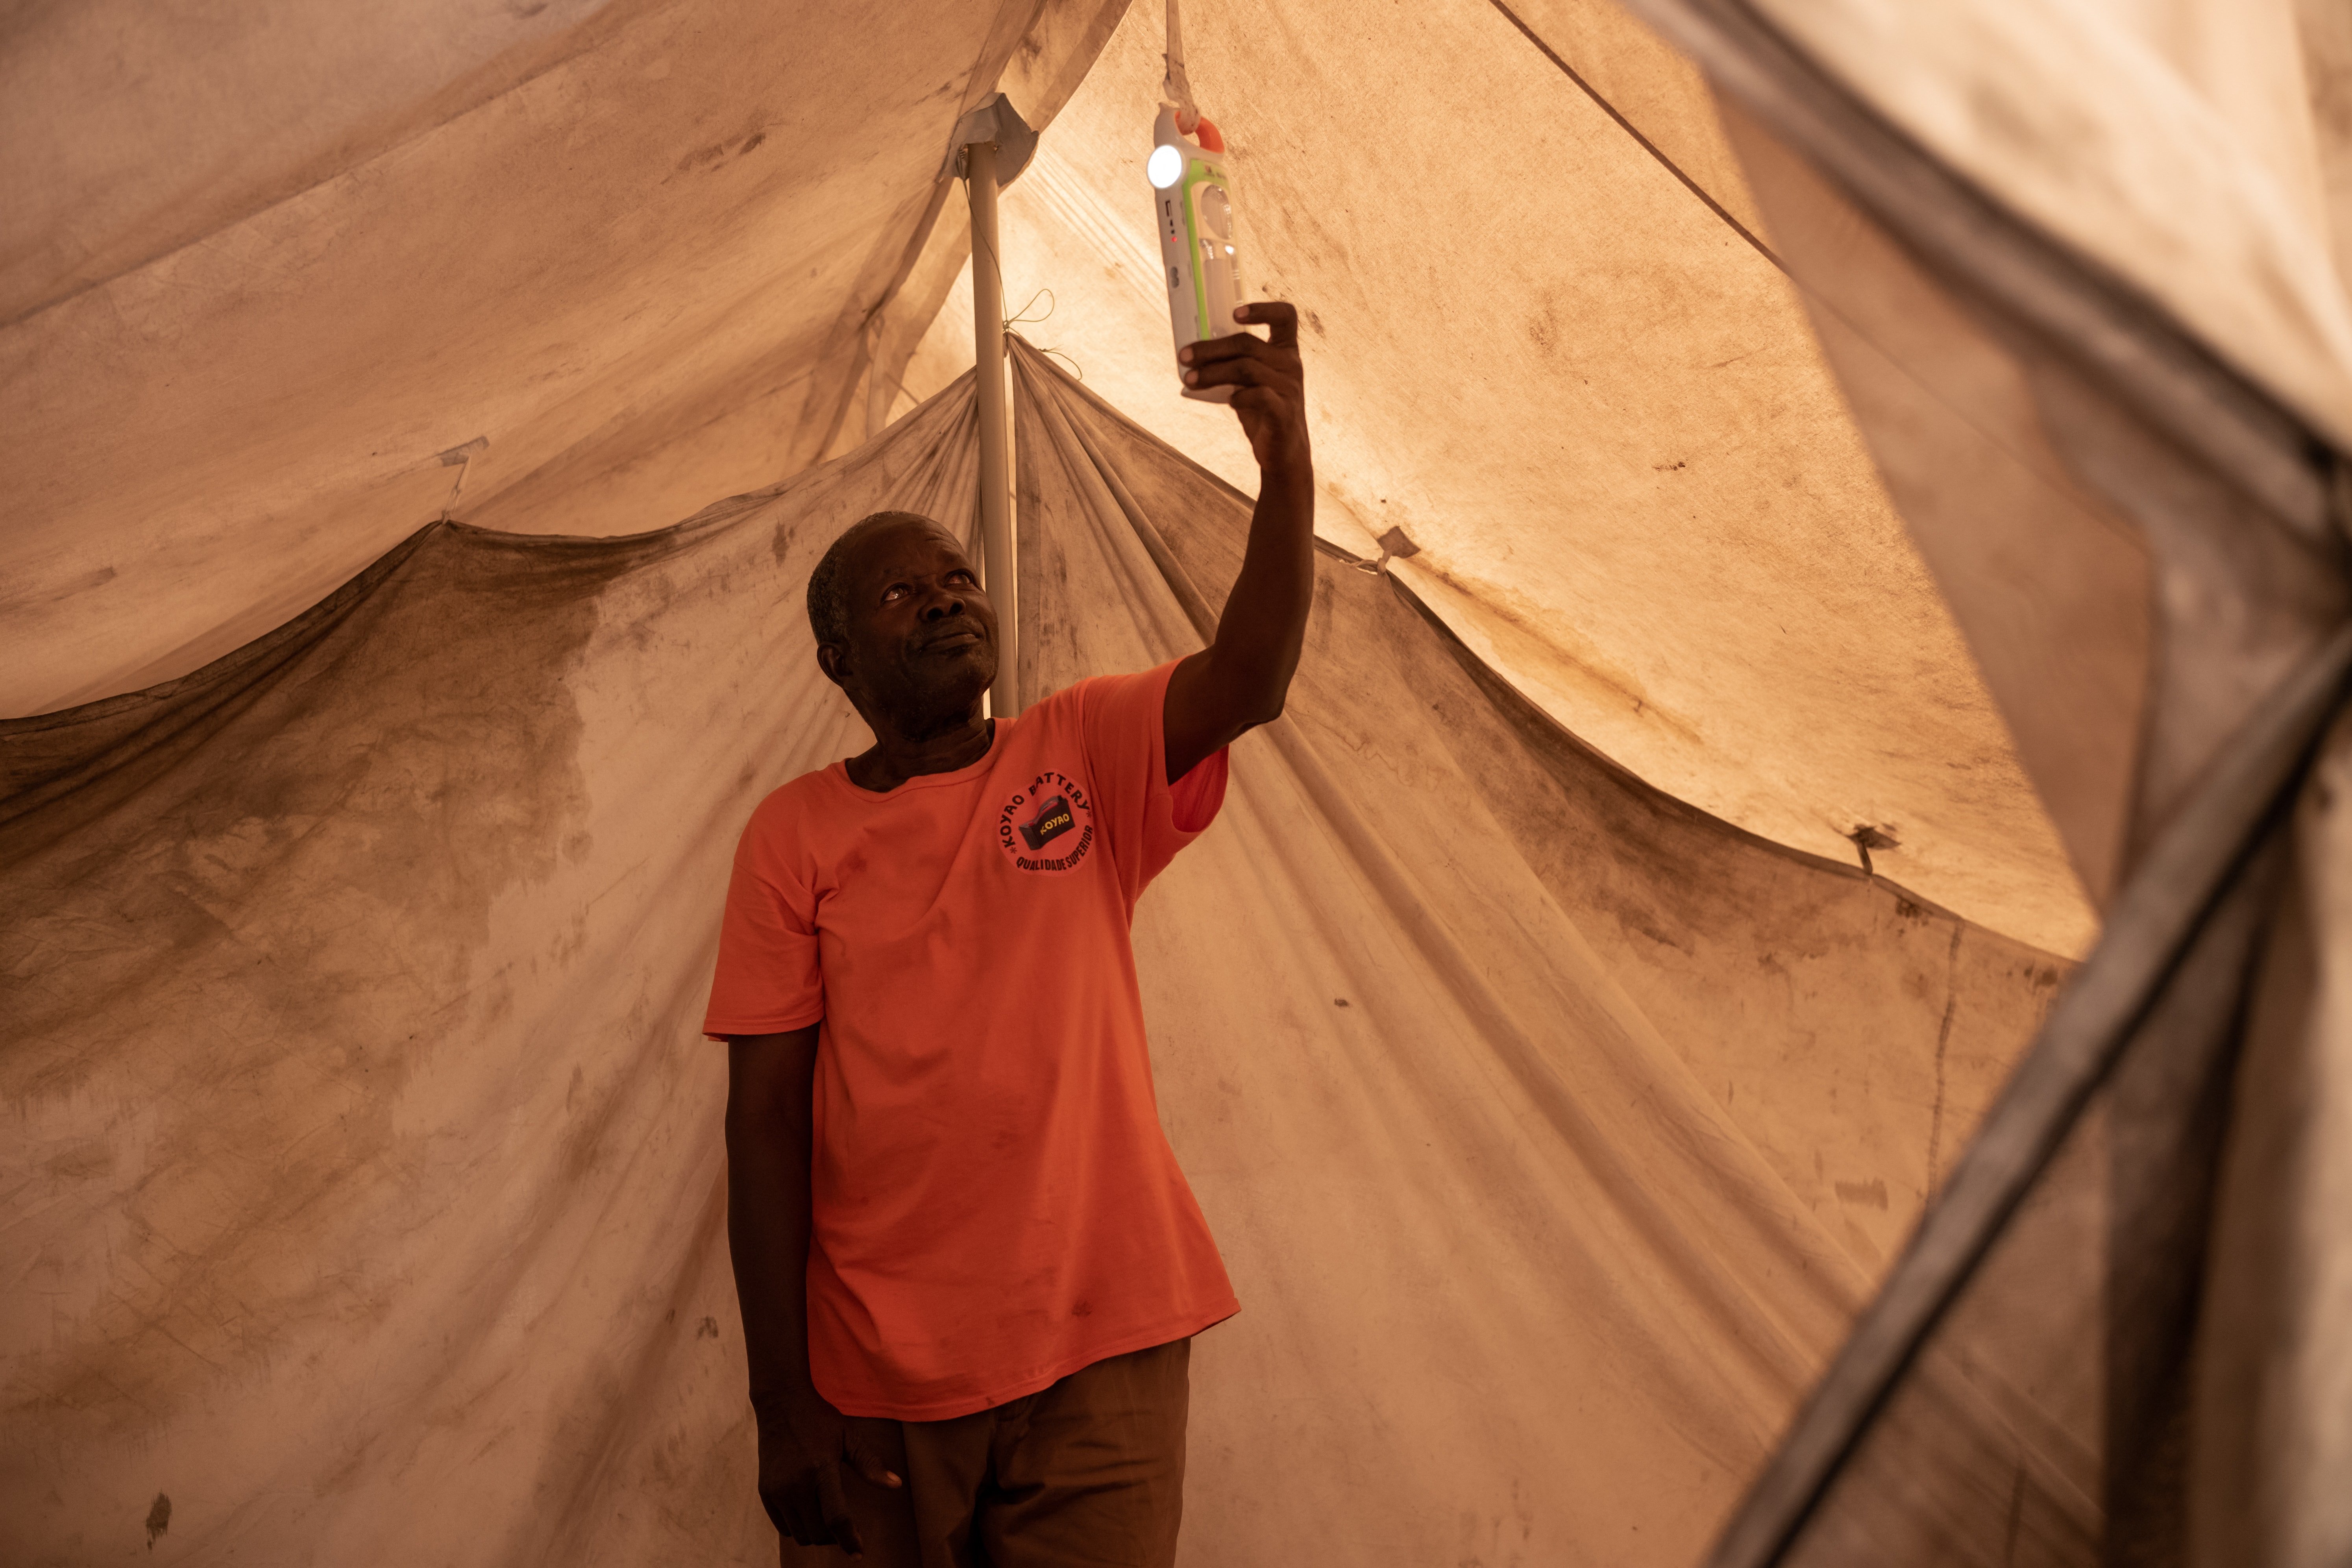 People who live in makeshift shelter were given solar lamp. It helps them reduce the risk going to the public toilet at night. (Photo: Ko Chung Ming / Oxfam Volunteer Photographer)